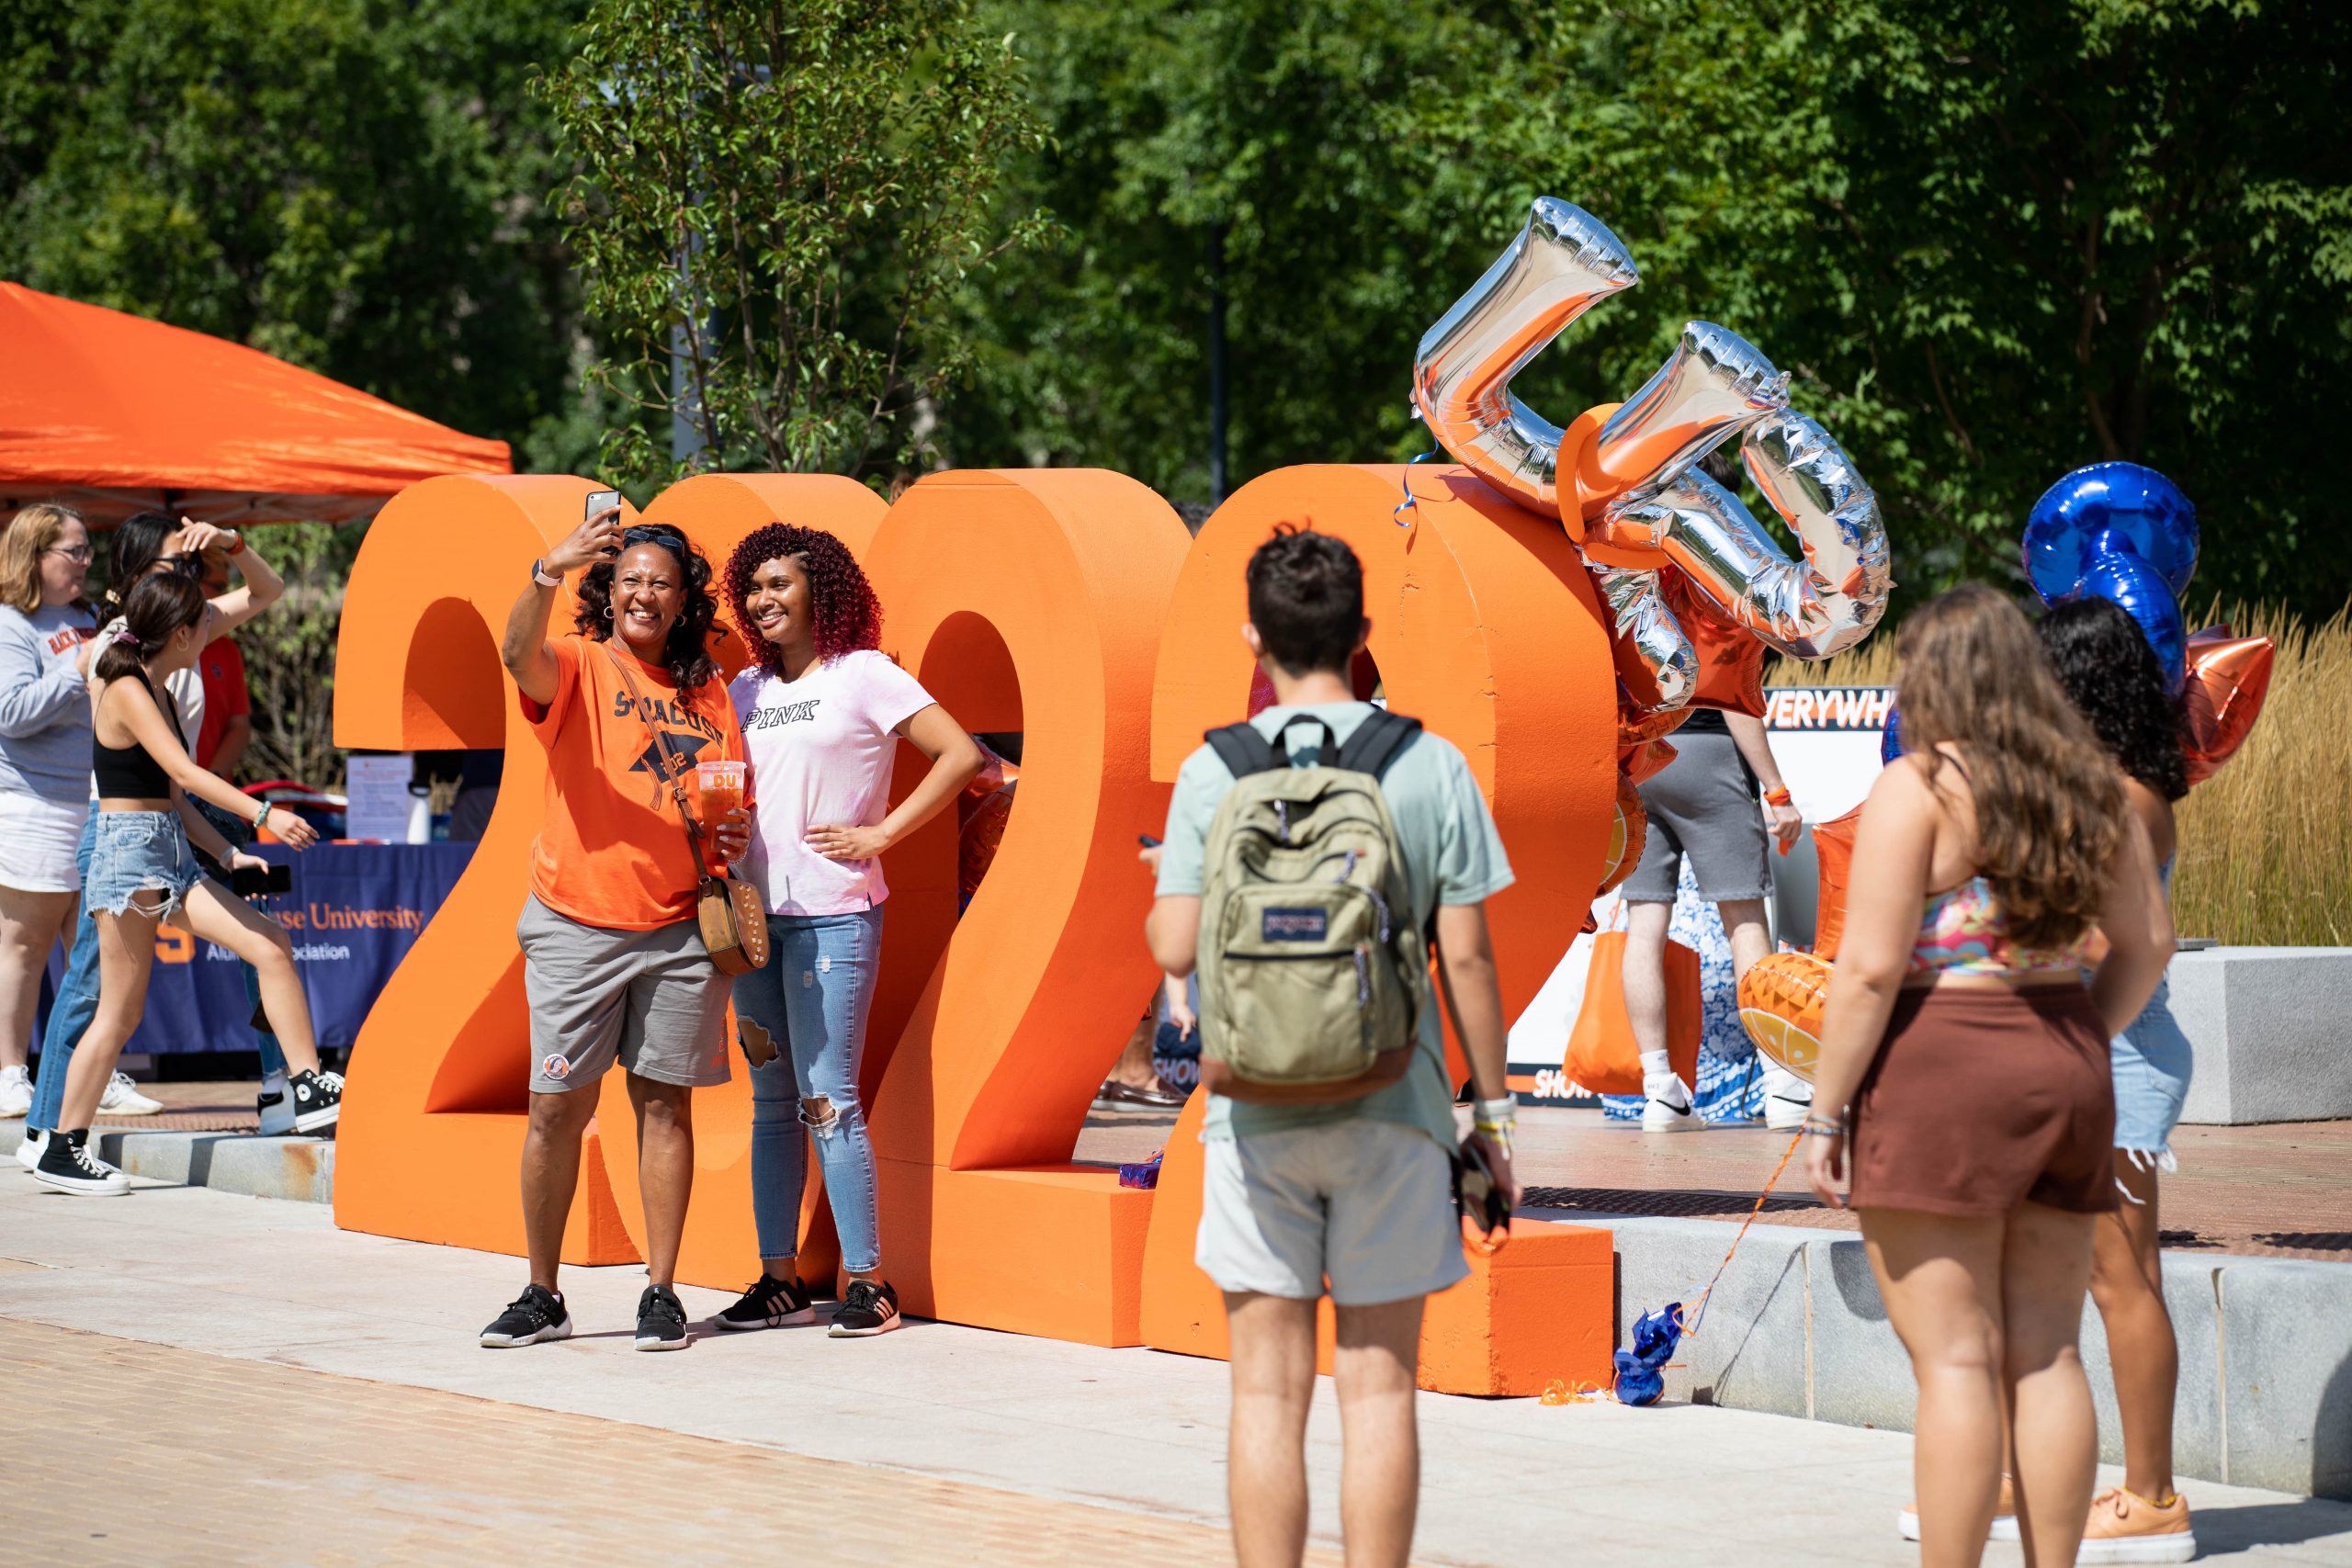 two people take a selfie in front of giant orange Block letters that say "2022" during Syracuse Welcome